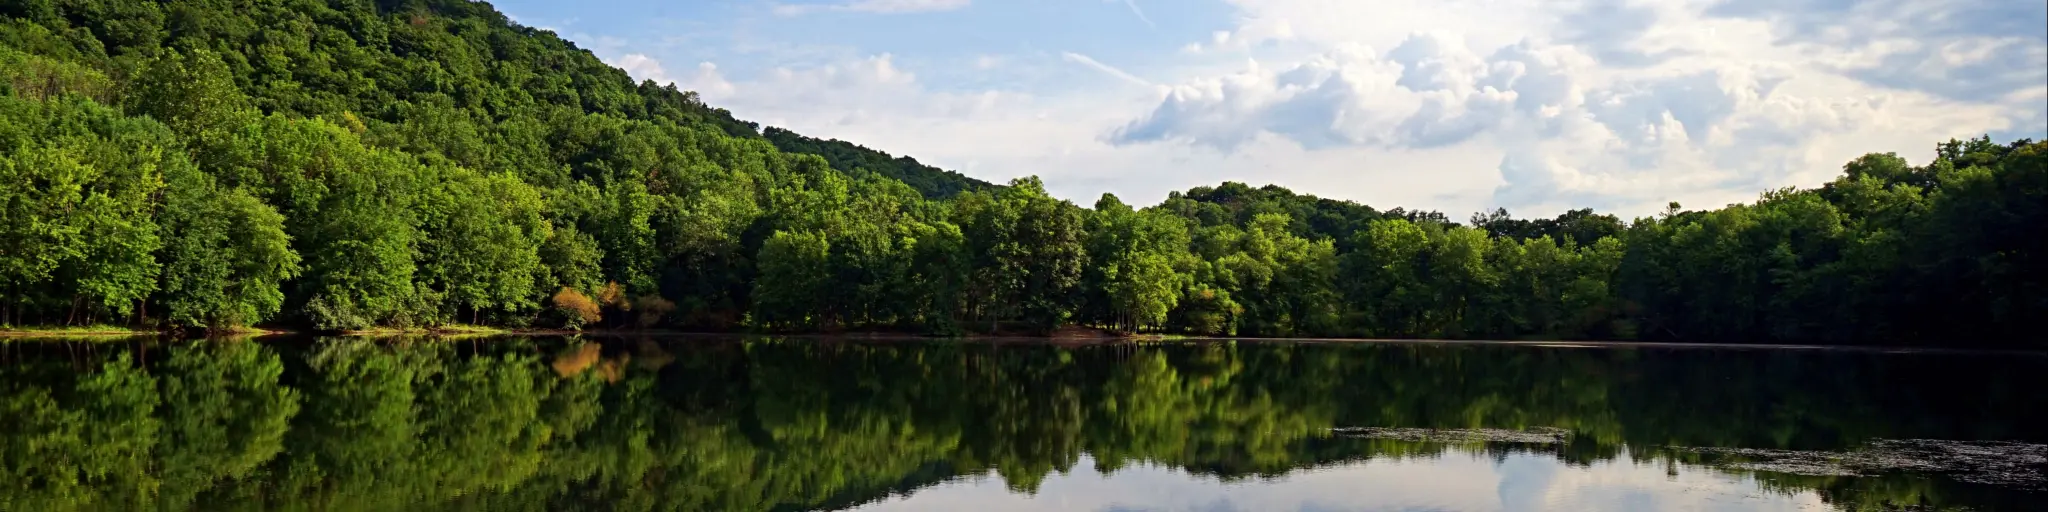 Mountains and clouds reflect in the still water of a lake at the Ramapo Valley County Reservation in Mahwah, New Jersey.